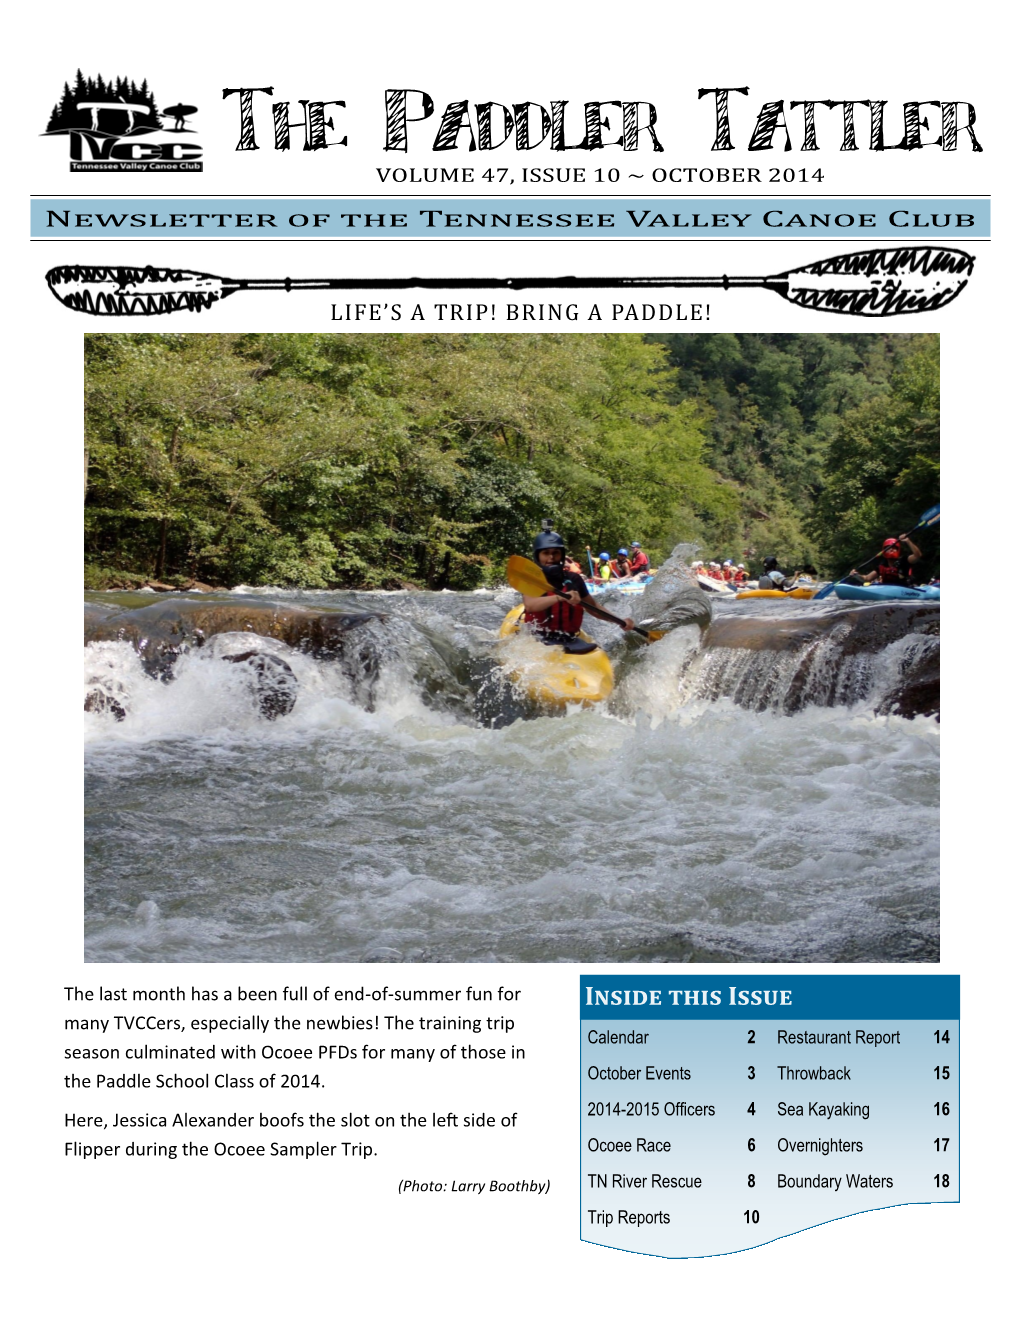 Middle Ocoee Guidebook and Training Manual